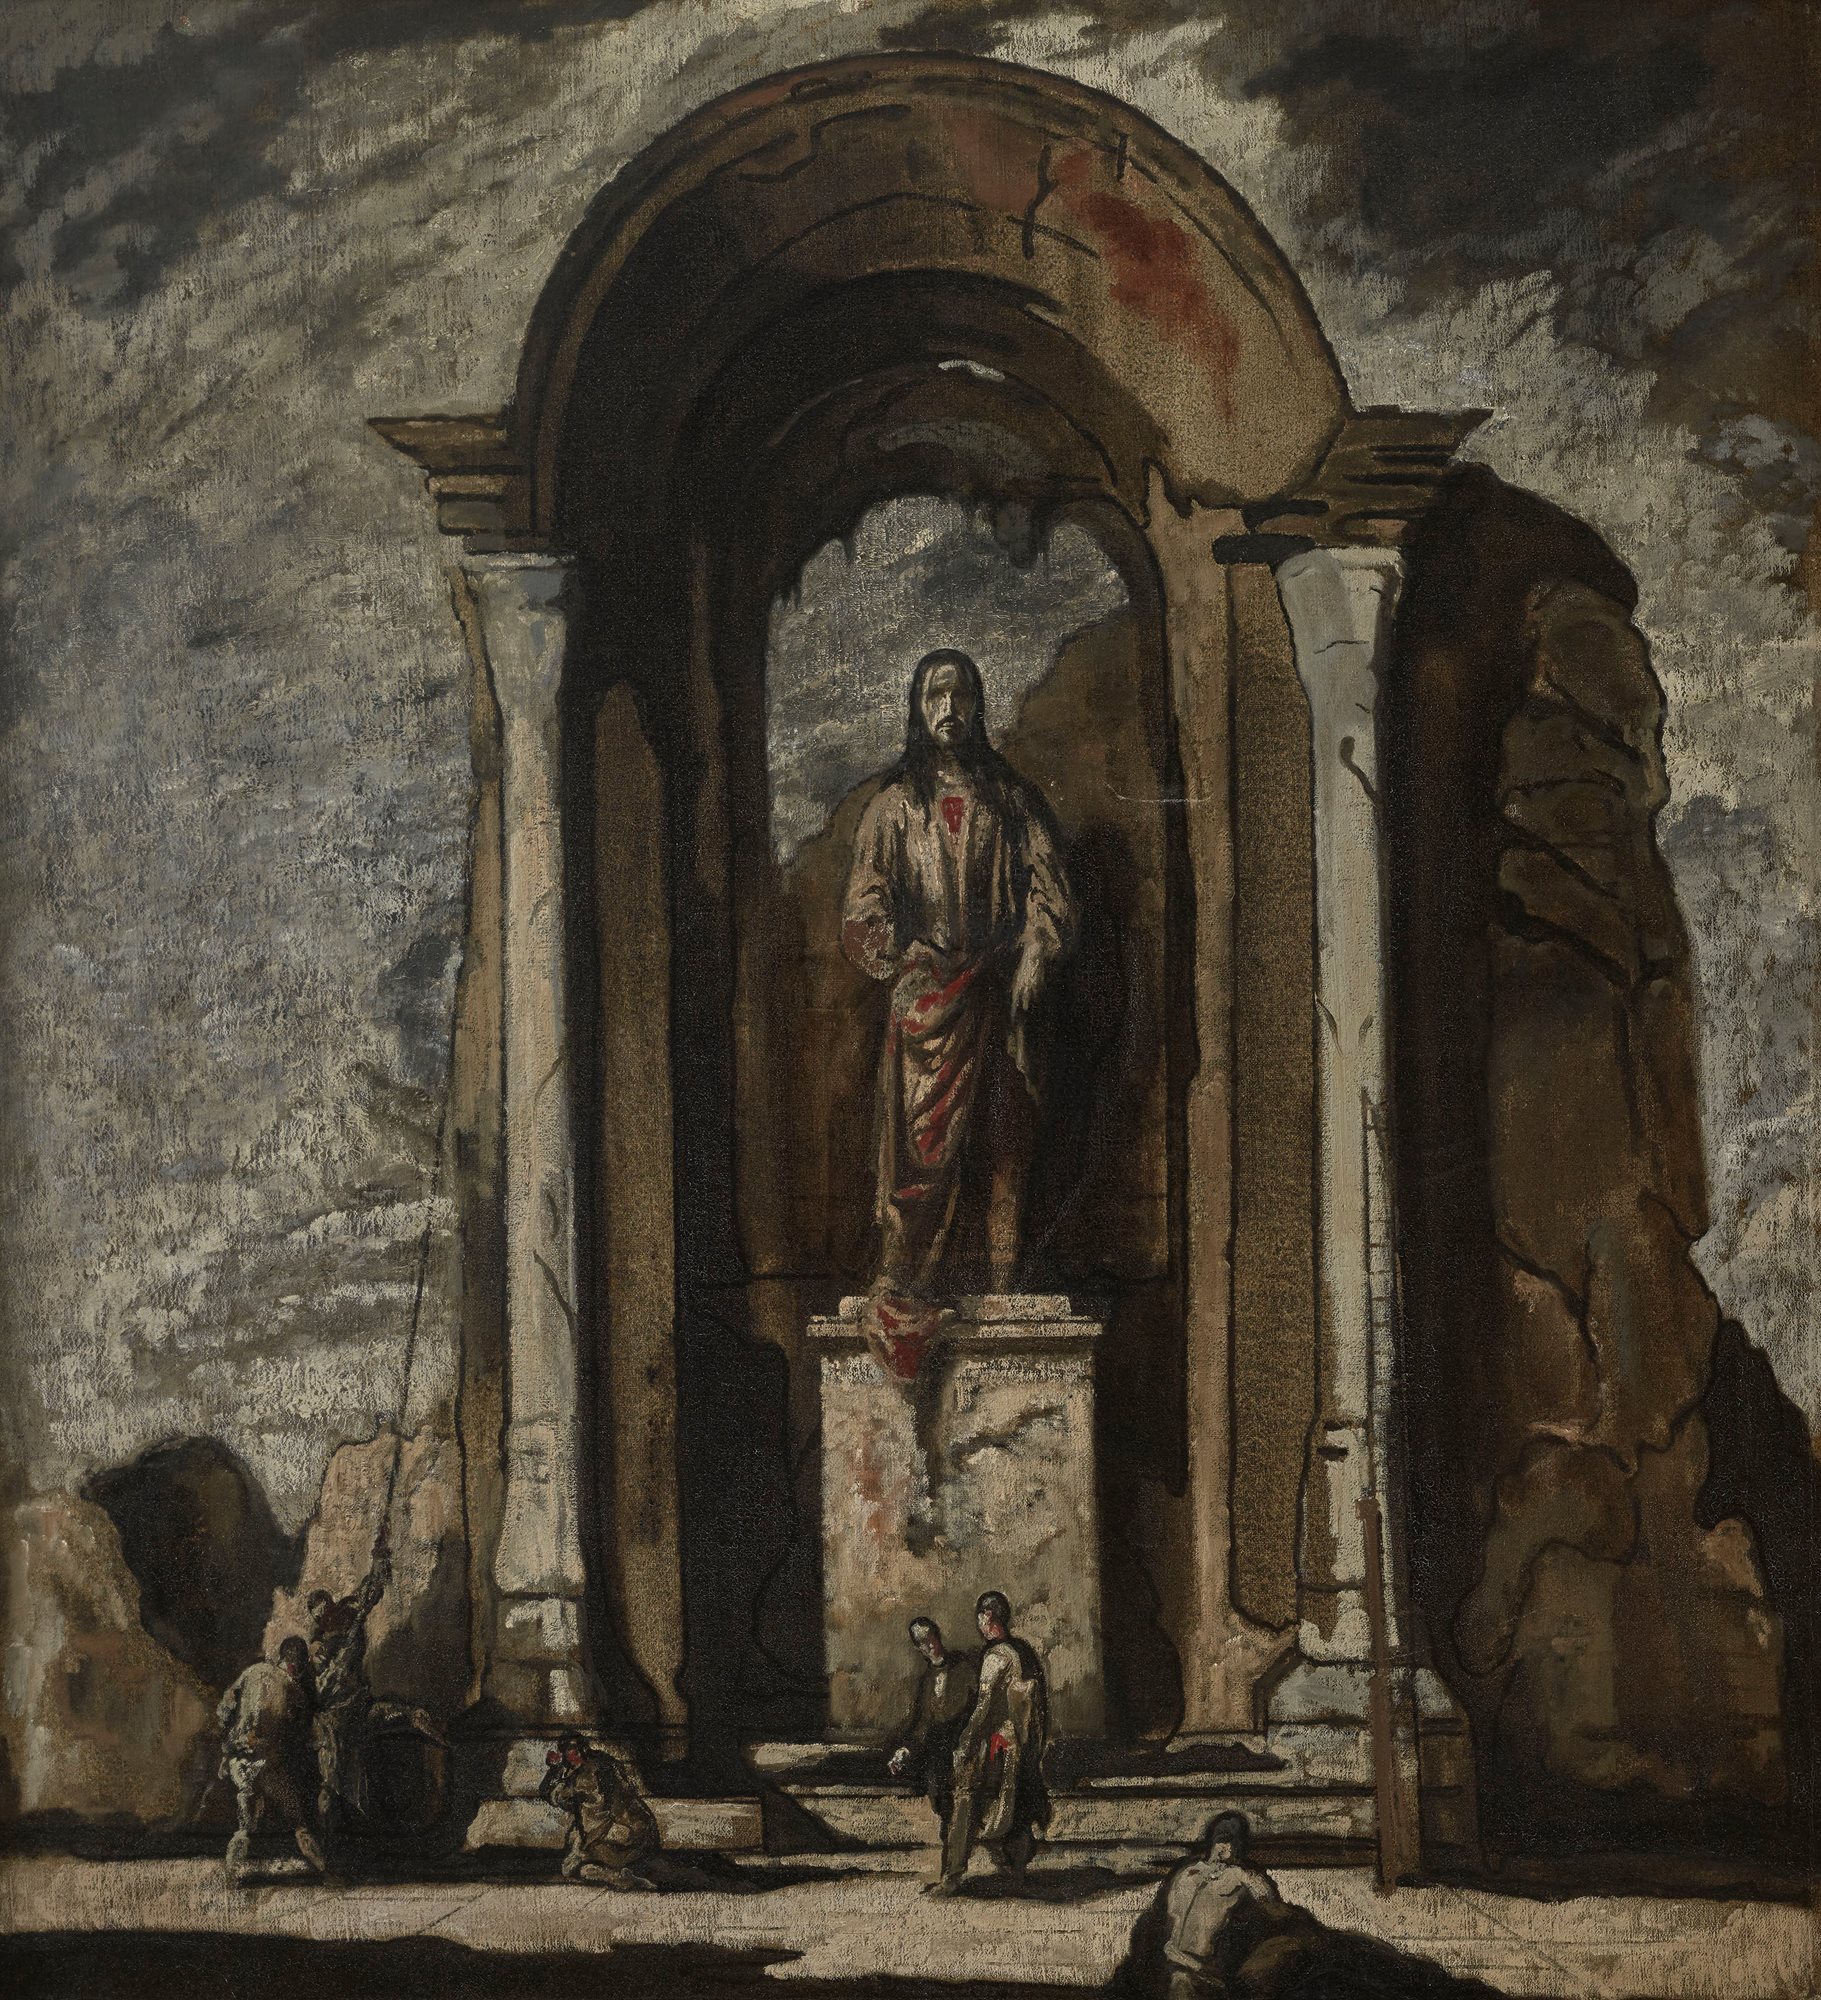 The Shrine (formerly The Demolition of the Statue and the Arch)